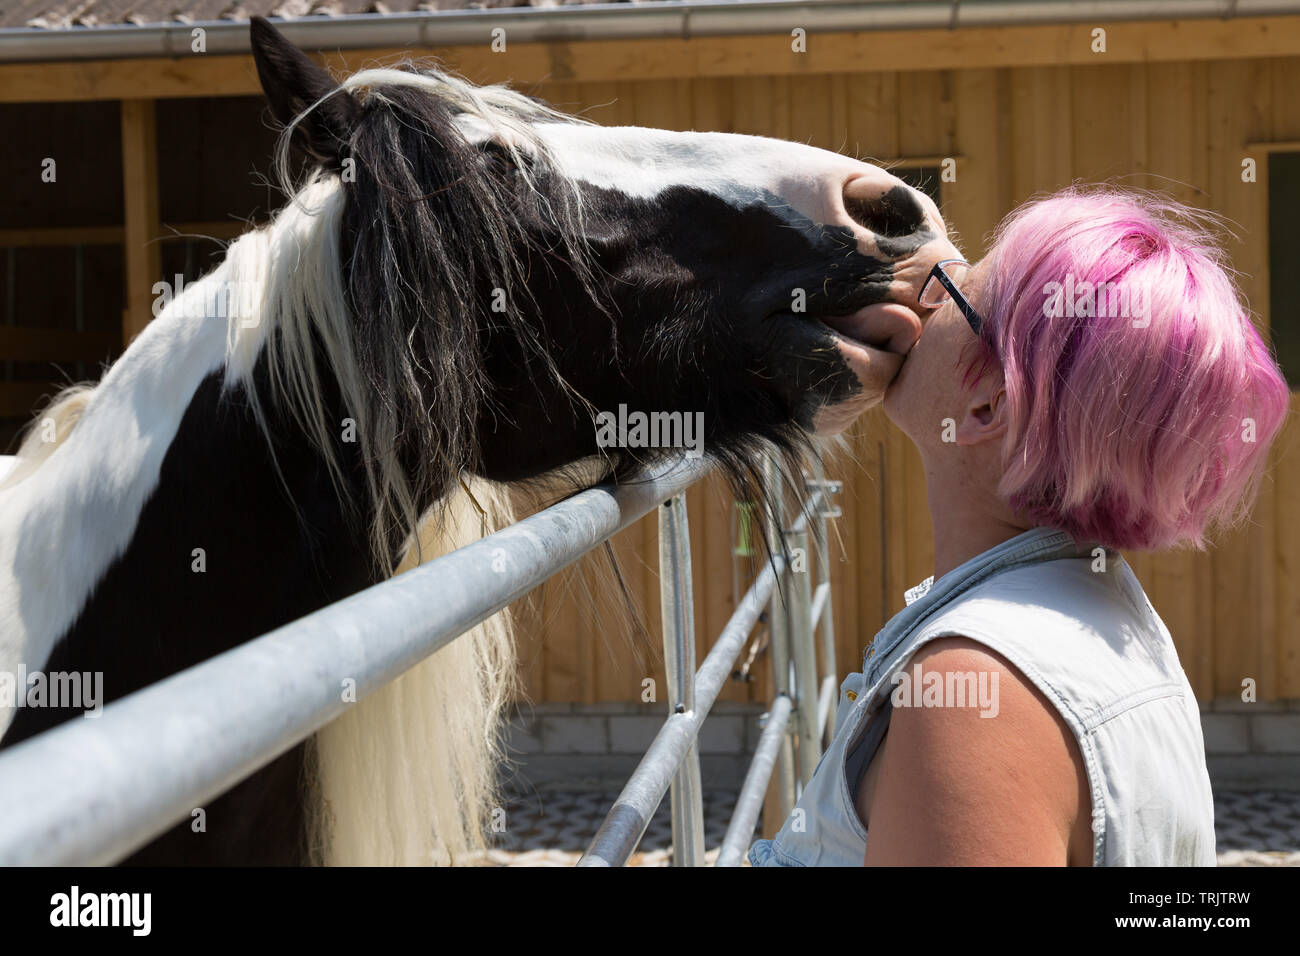 Tongue Kiss High Resolution Stock Photography and Images - Alamy